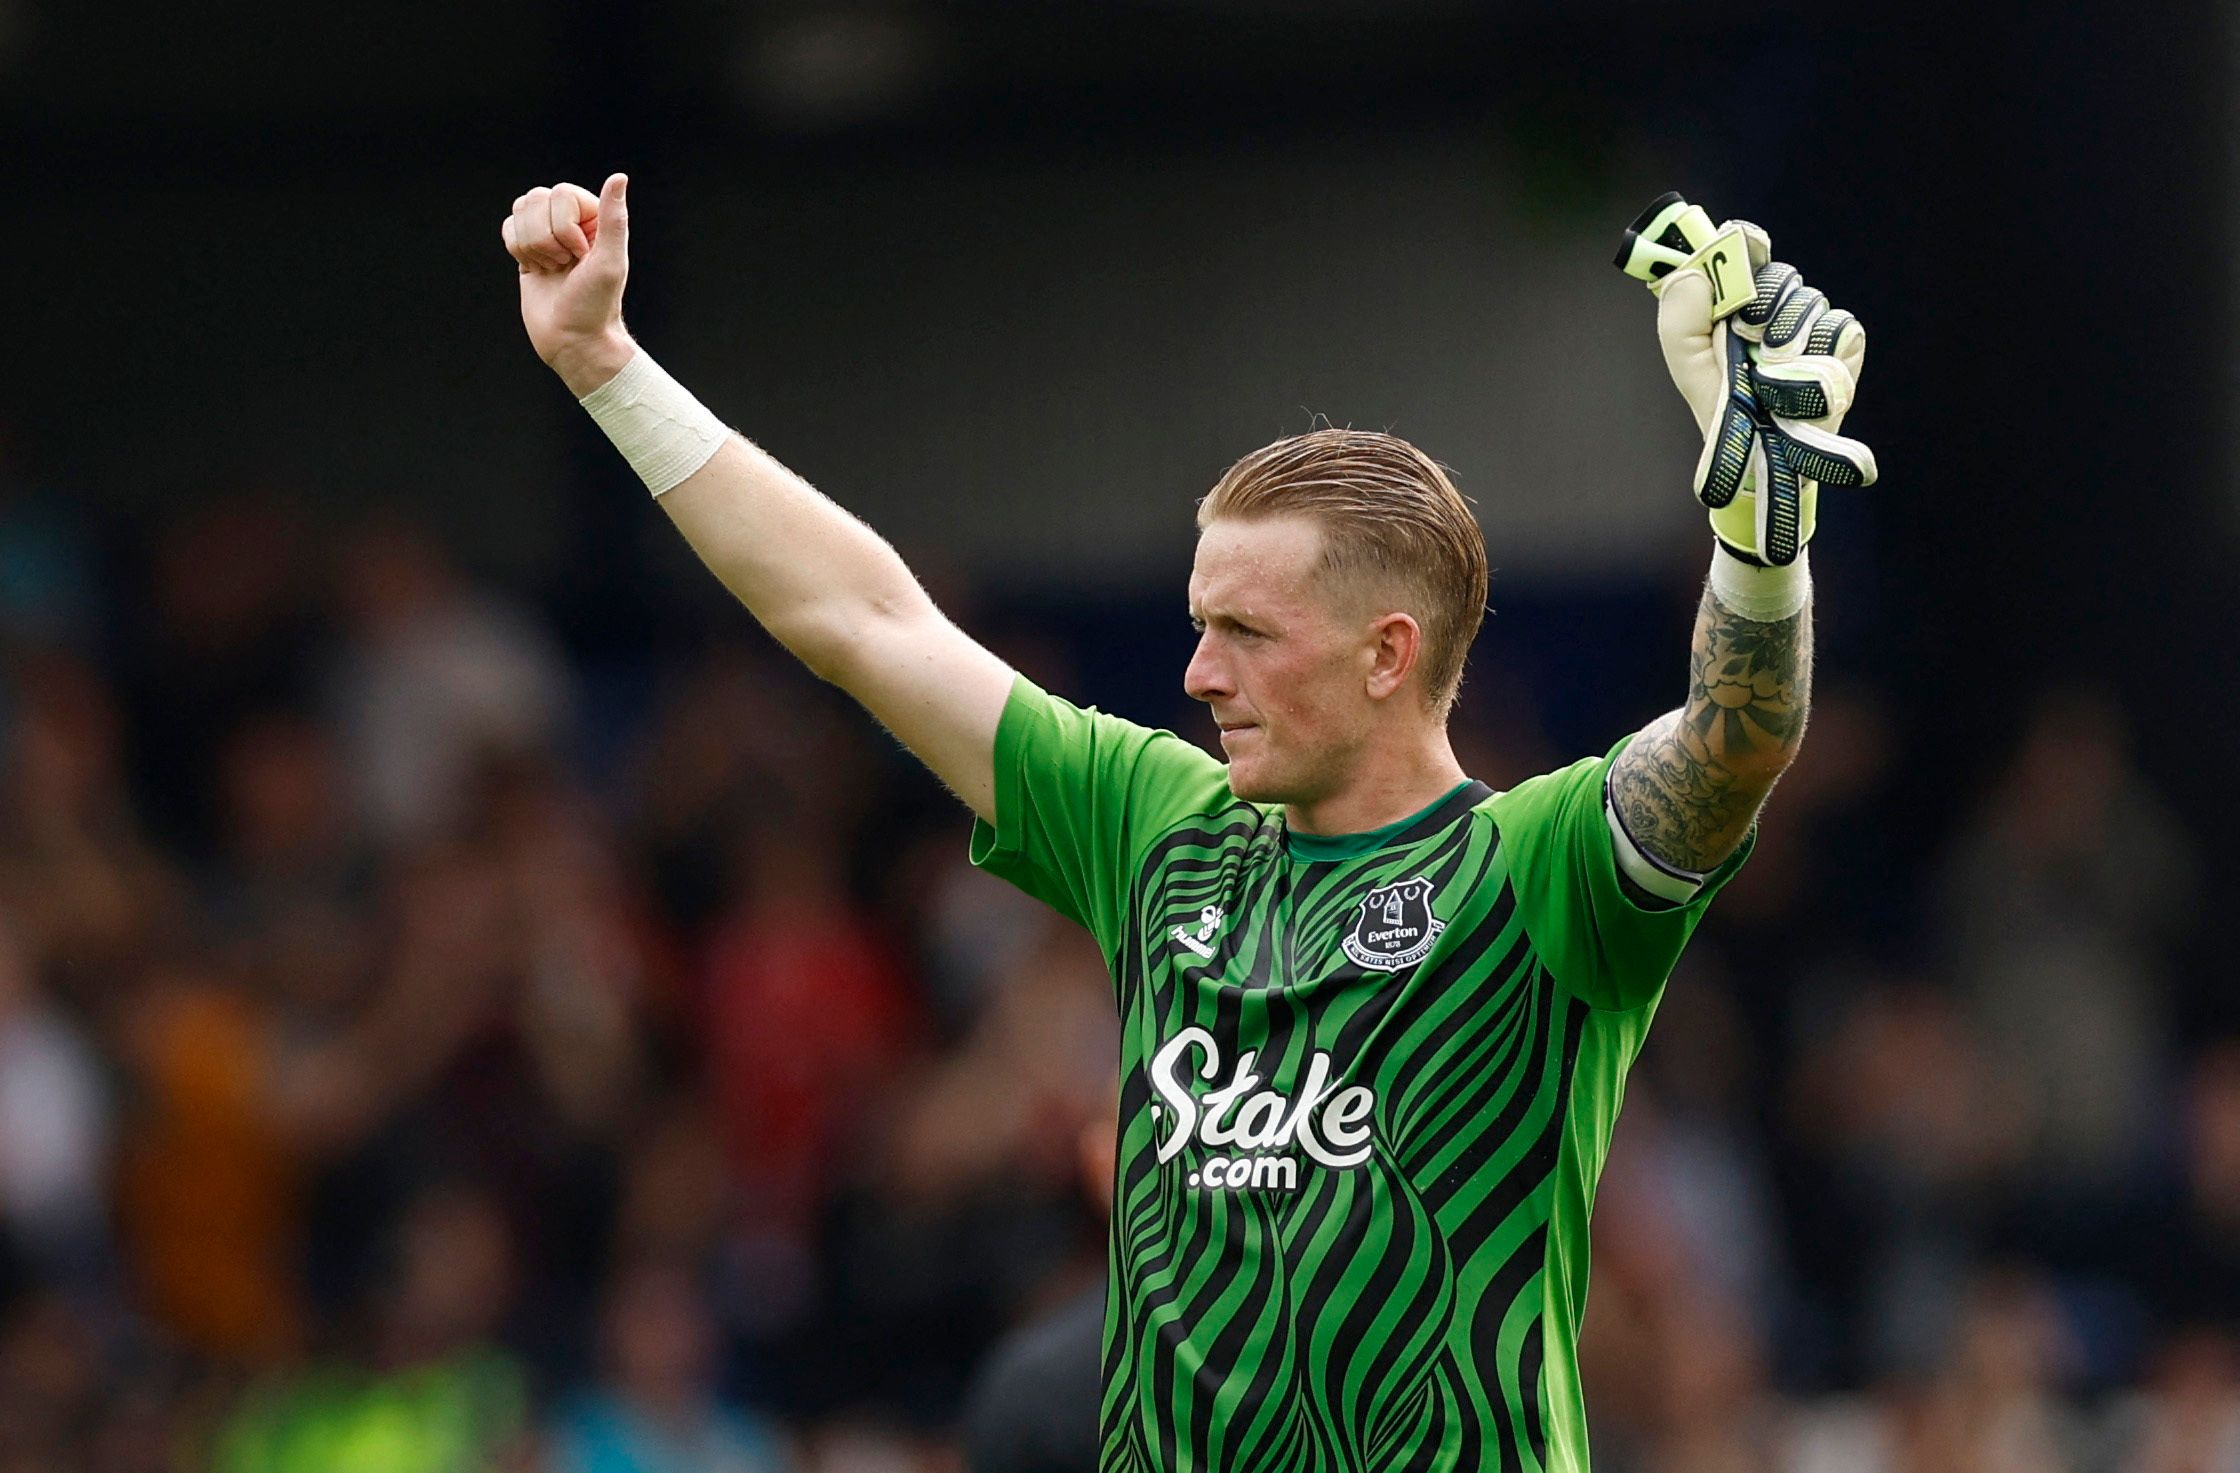 Everton: Manchester United eyeing Pickford as potential De Gea replacement -Everton News